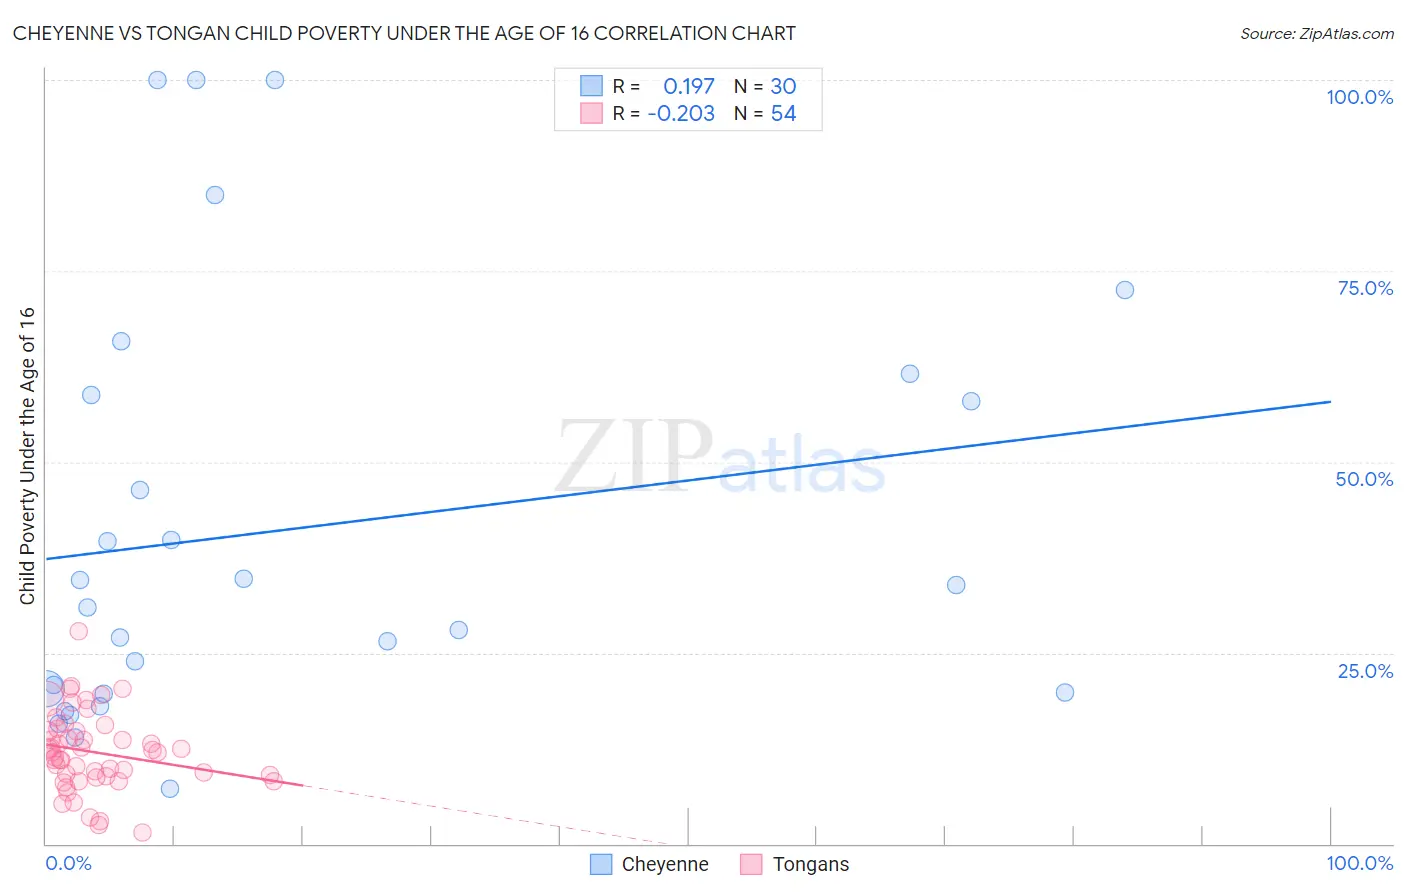 Cheyenne vs Tongan Child Poverty Under the Age of 16